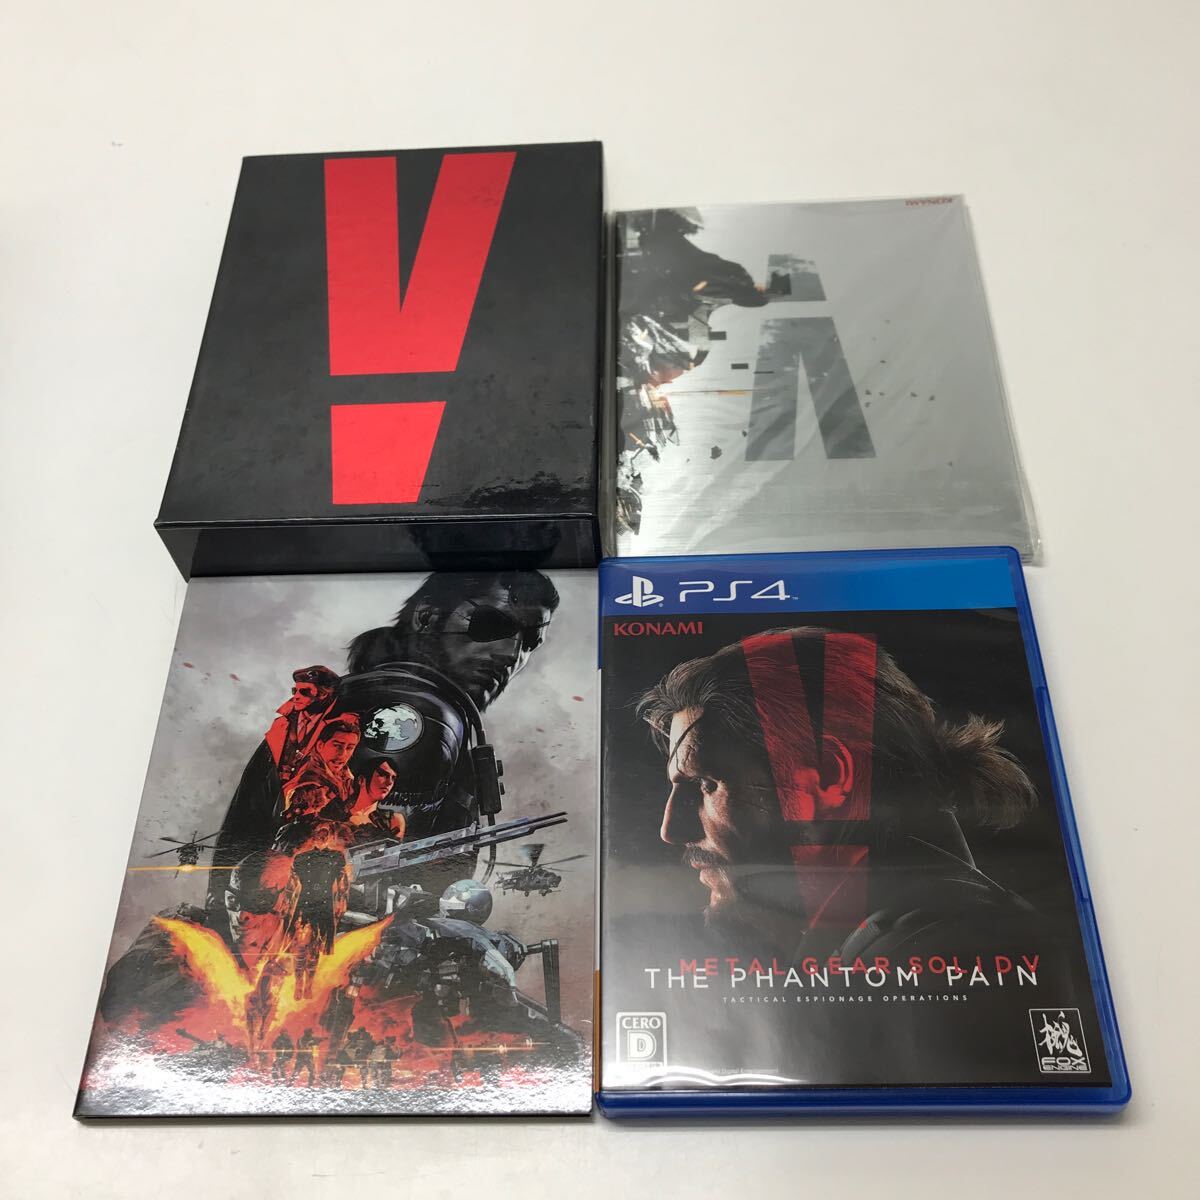 A405★Ps4ソフトMETAL GEAR SOLID V THE PHANTOM PAIN【動作品】の画像1